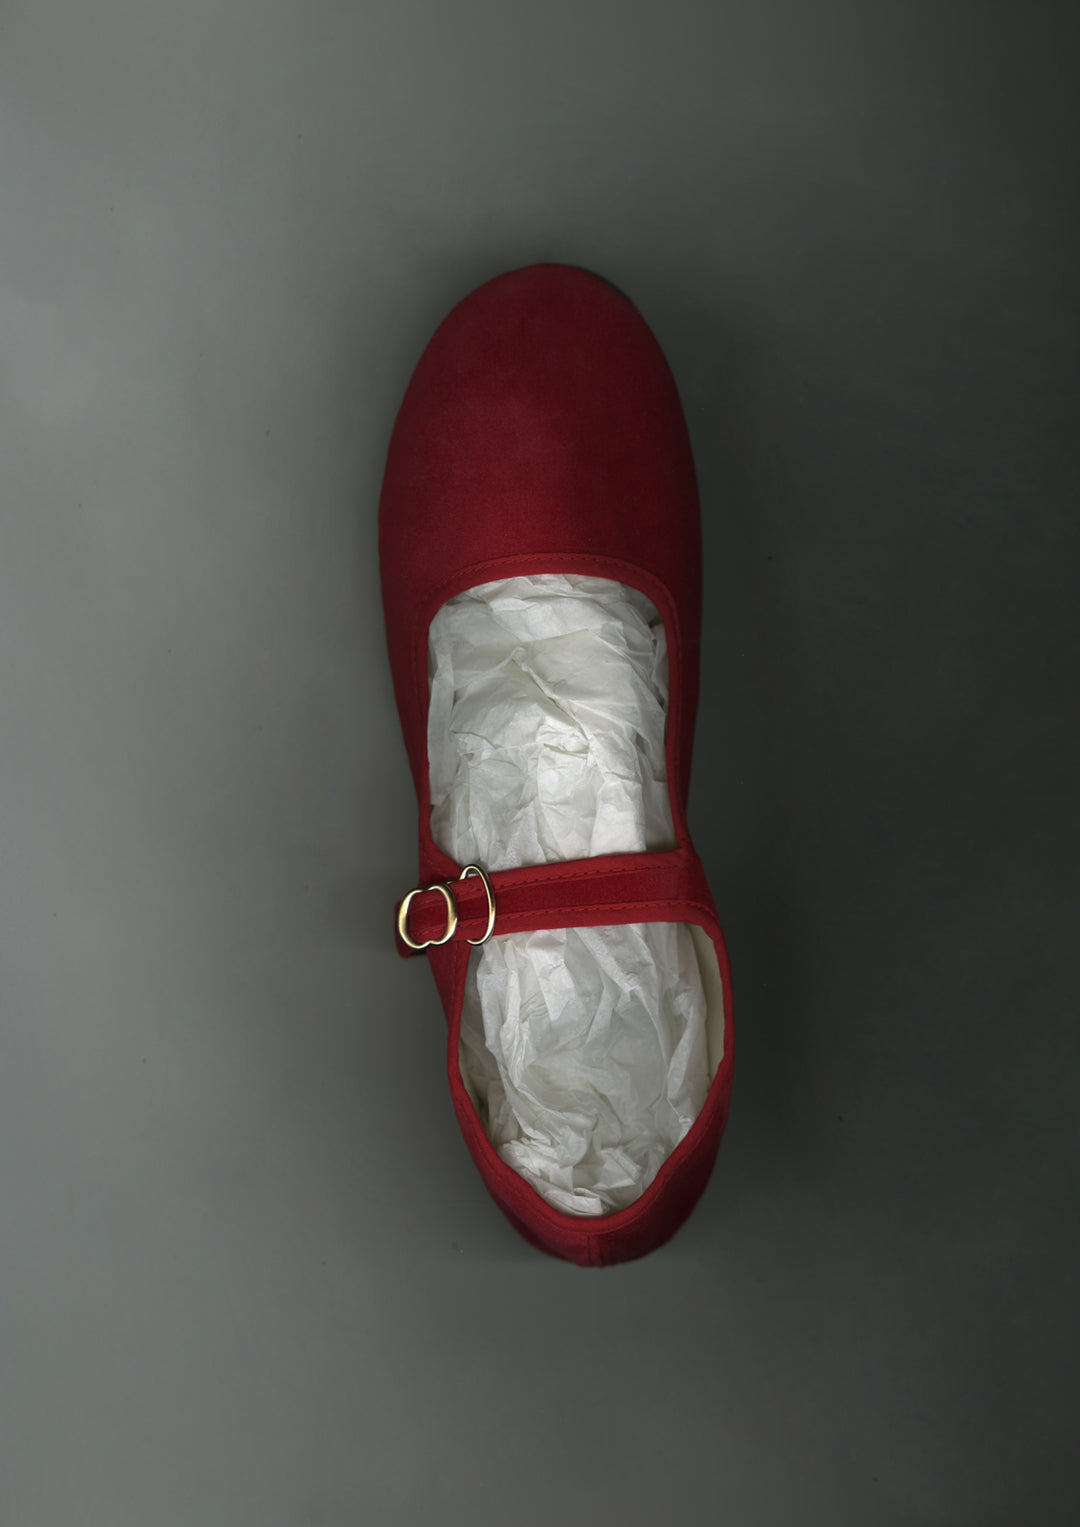 RED SLIPPERS